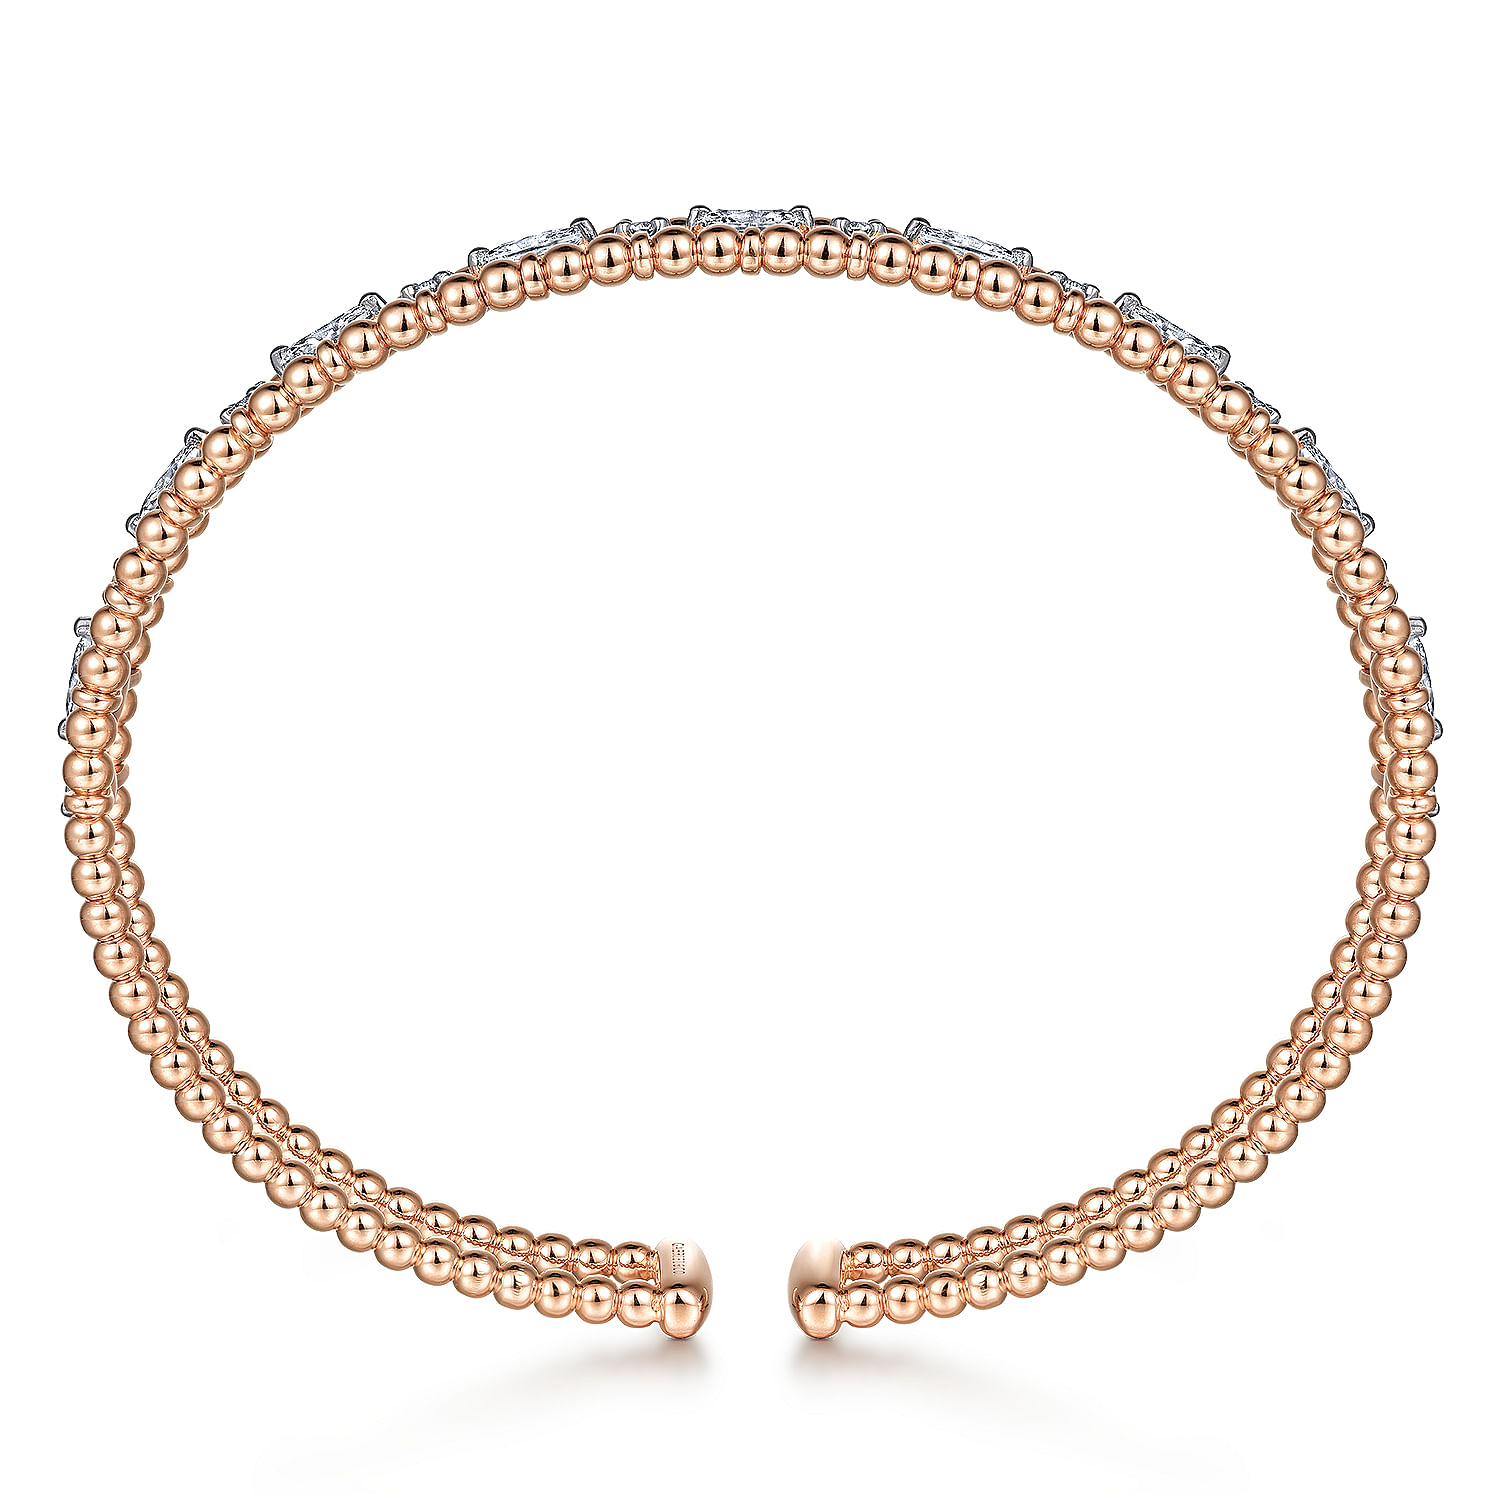 14K Rose Gold Bujukan Cuff Bracelet with Marquise and Round Diamonds